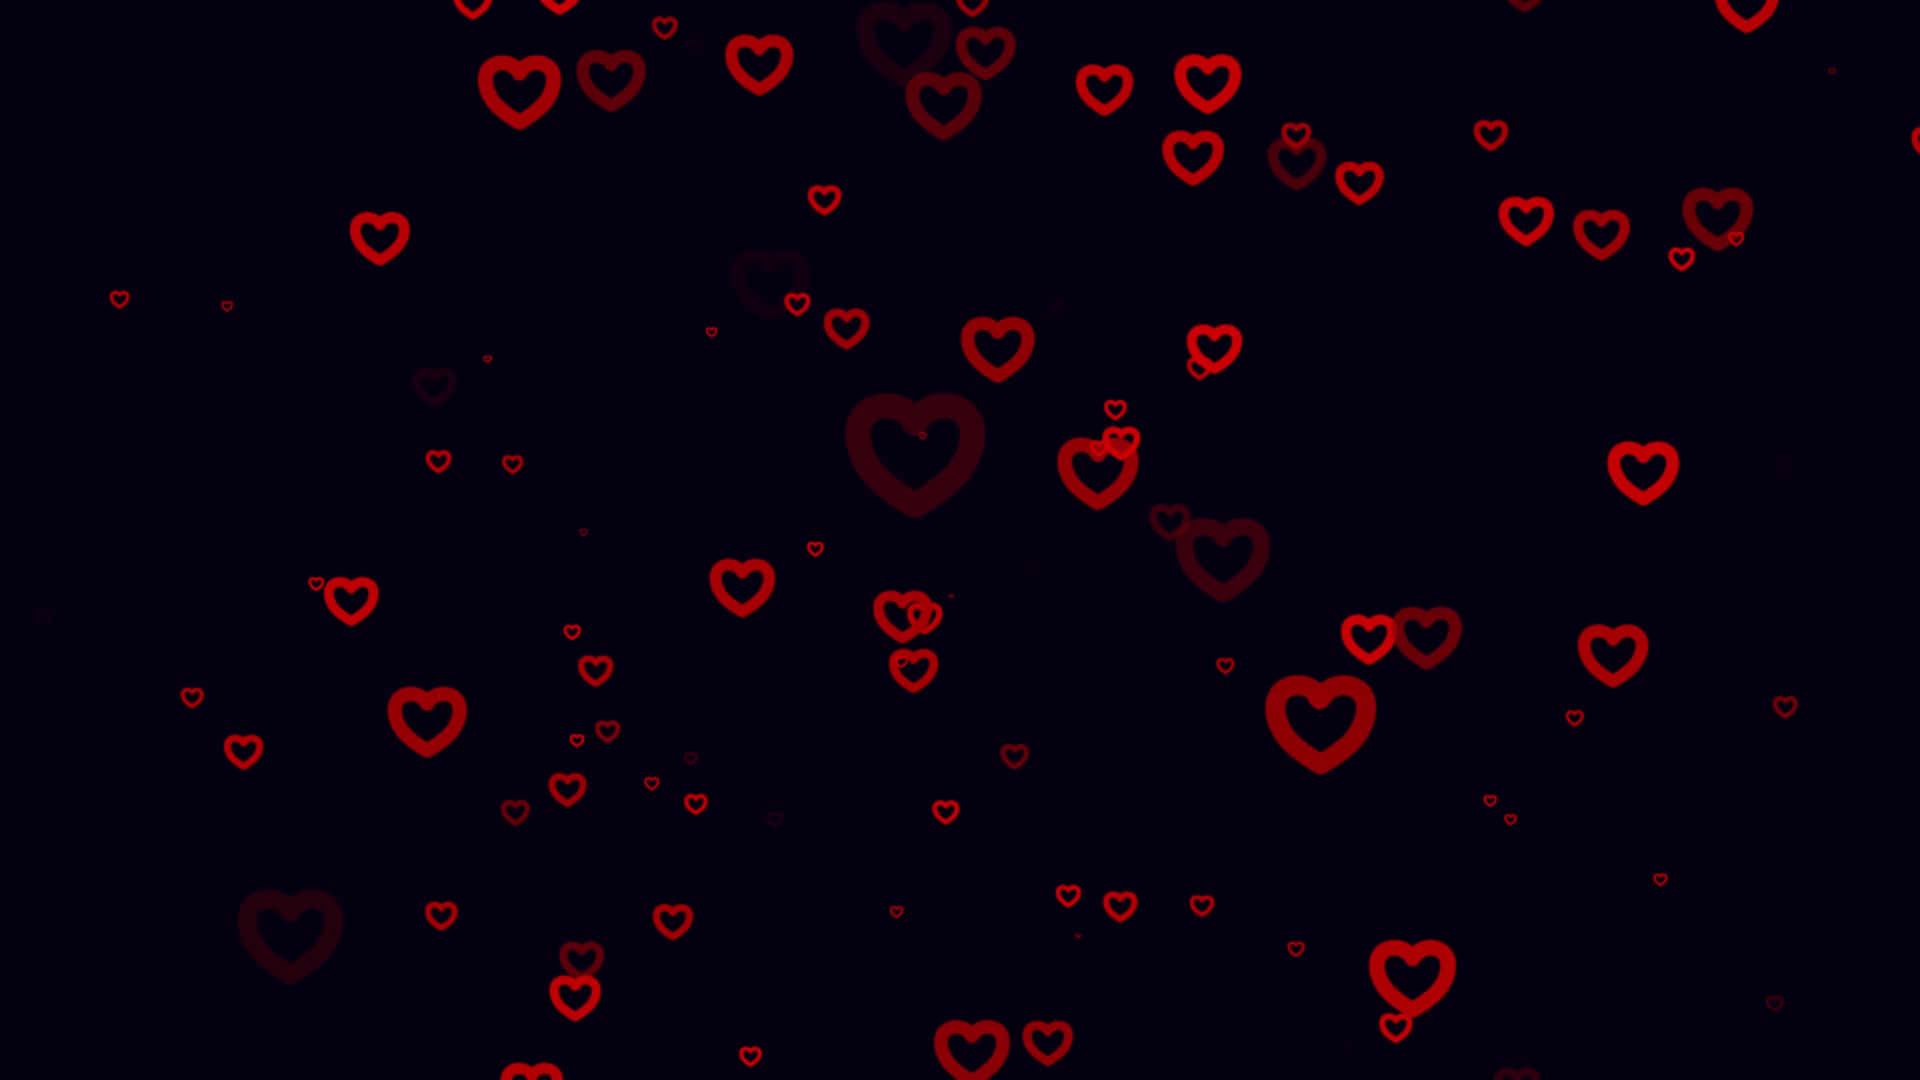 A Black Background With Red Hearts On It Wallpaper